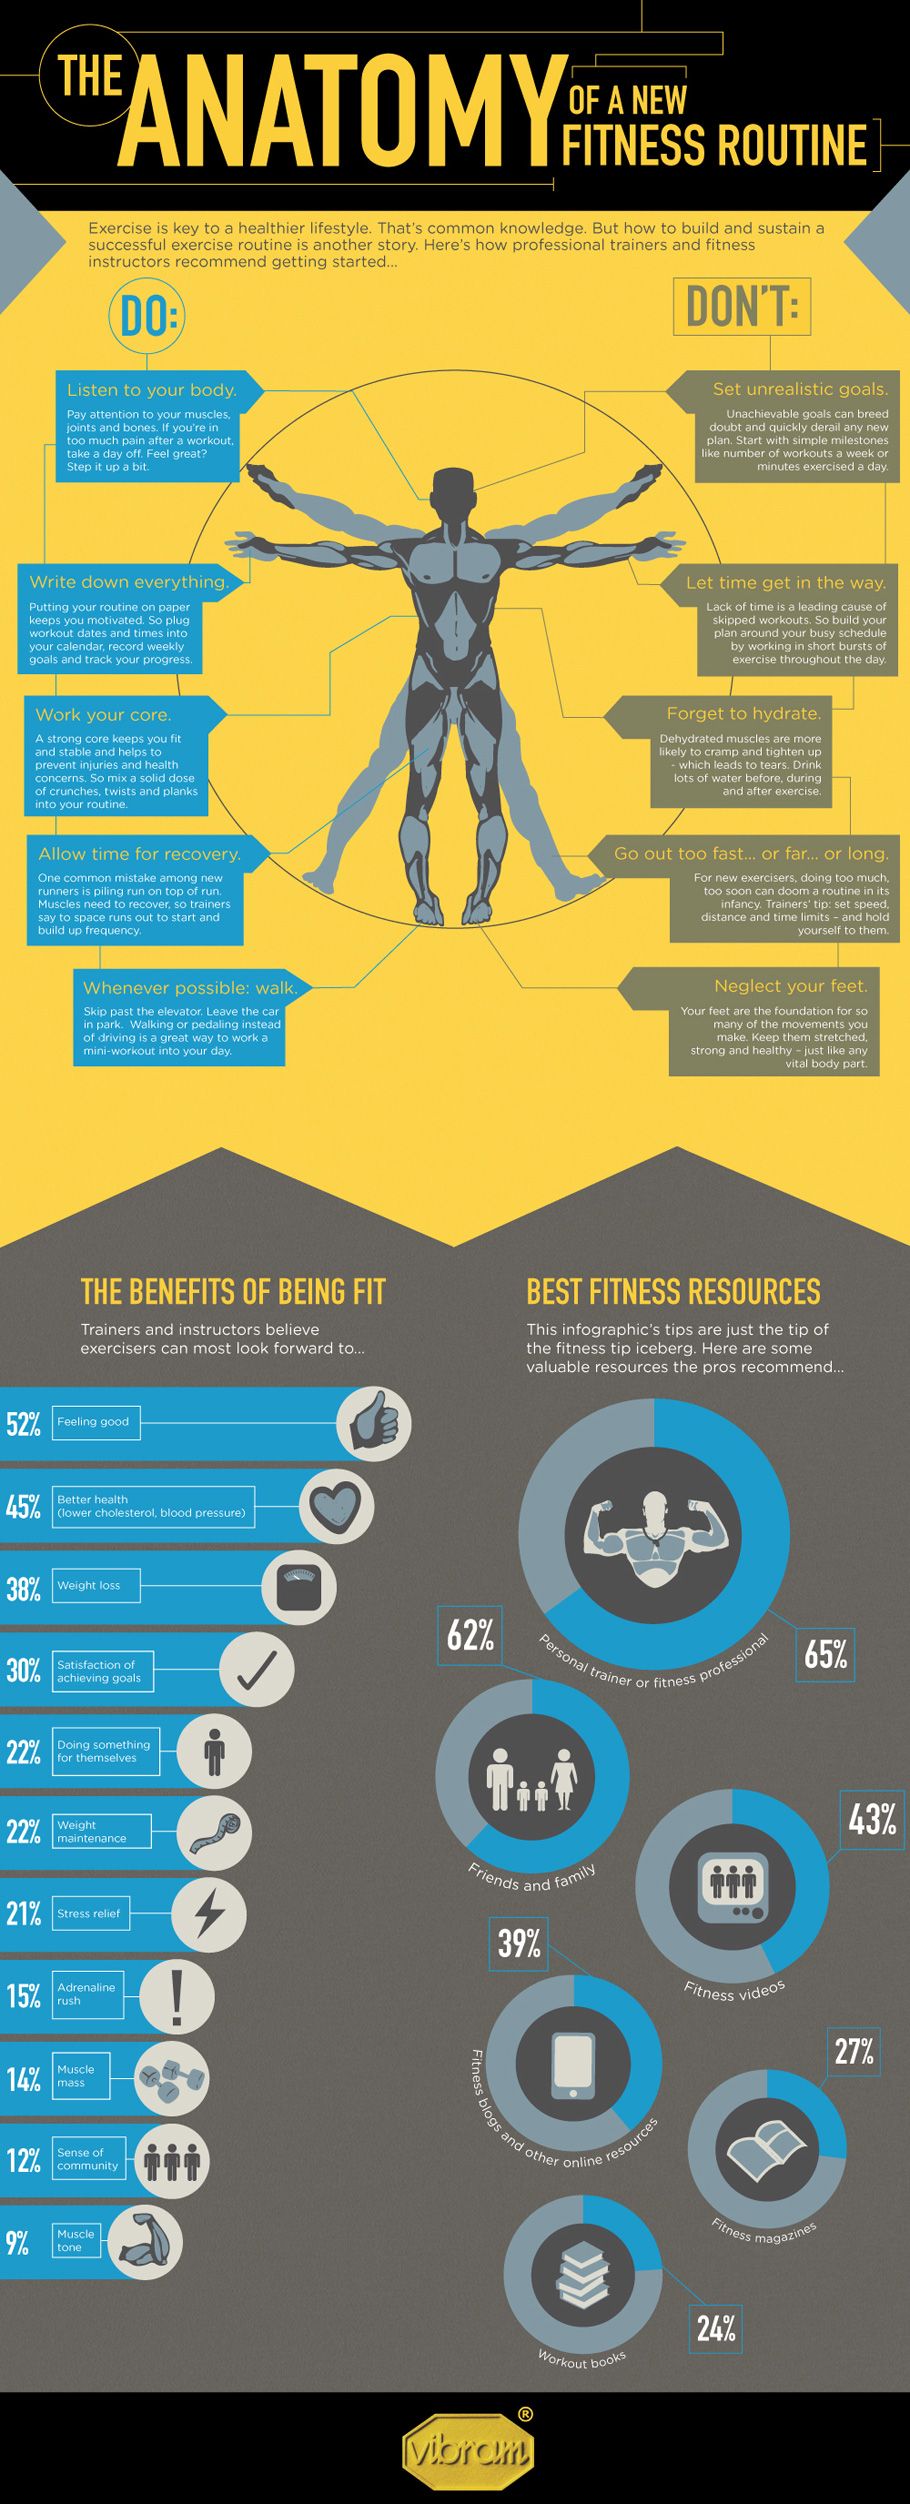 News - The Anatomy of A New Fitness Routine Infographic